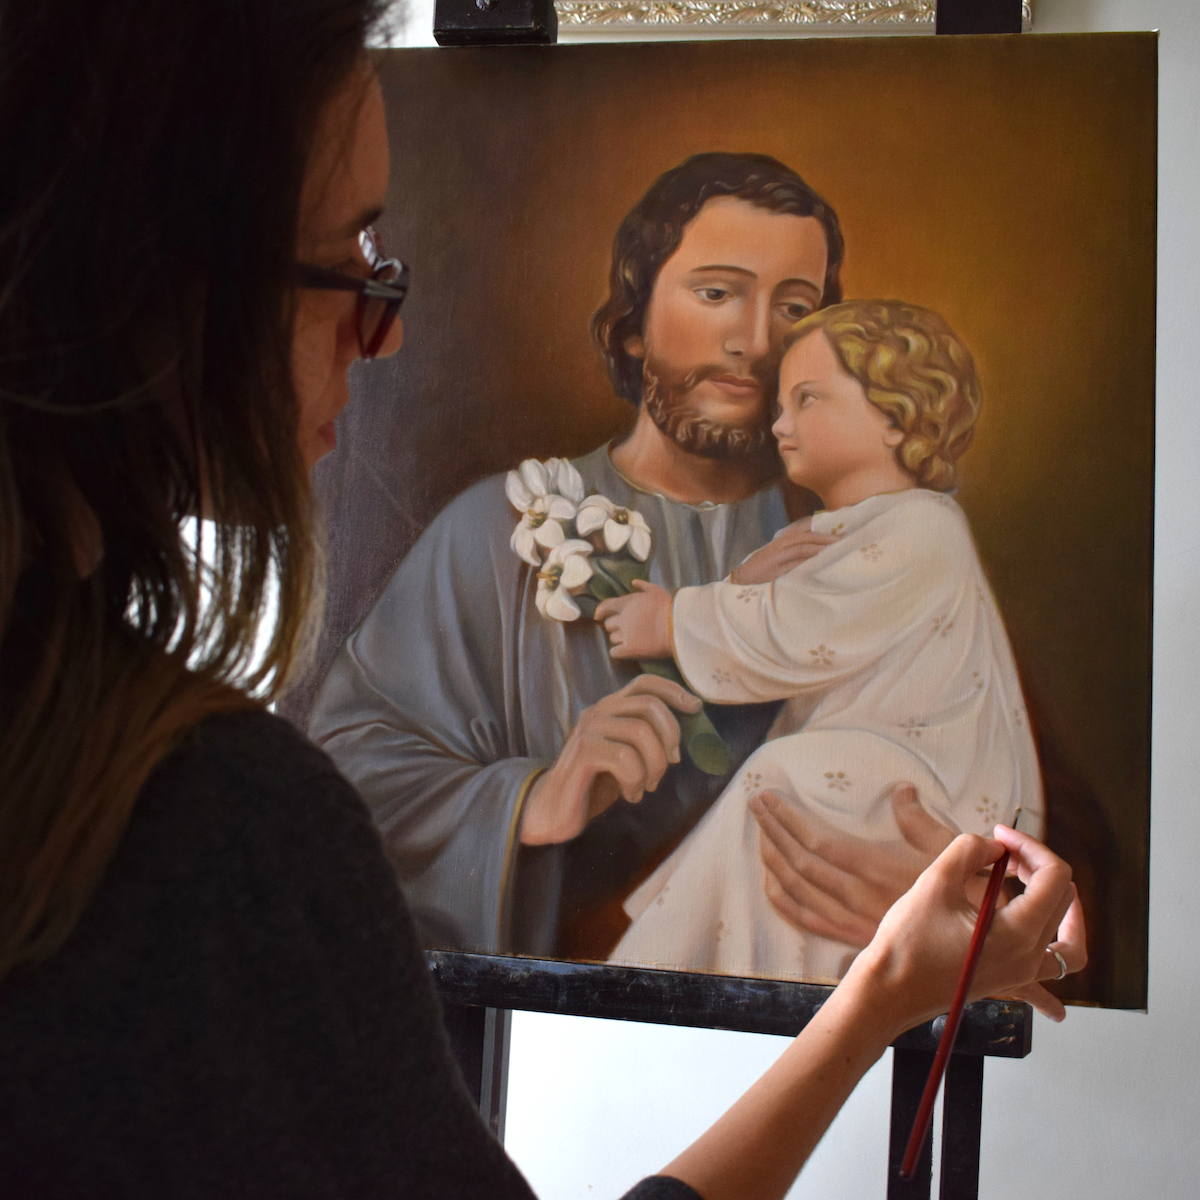 A portrait of the virtuous Protector of the Holy Family: Saint Joseph | 2021